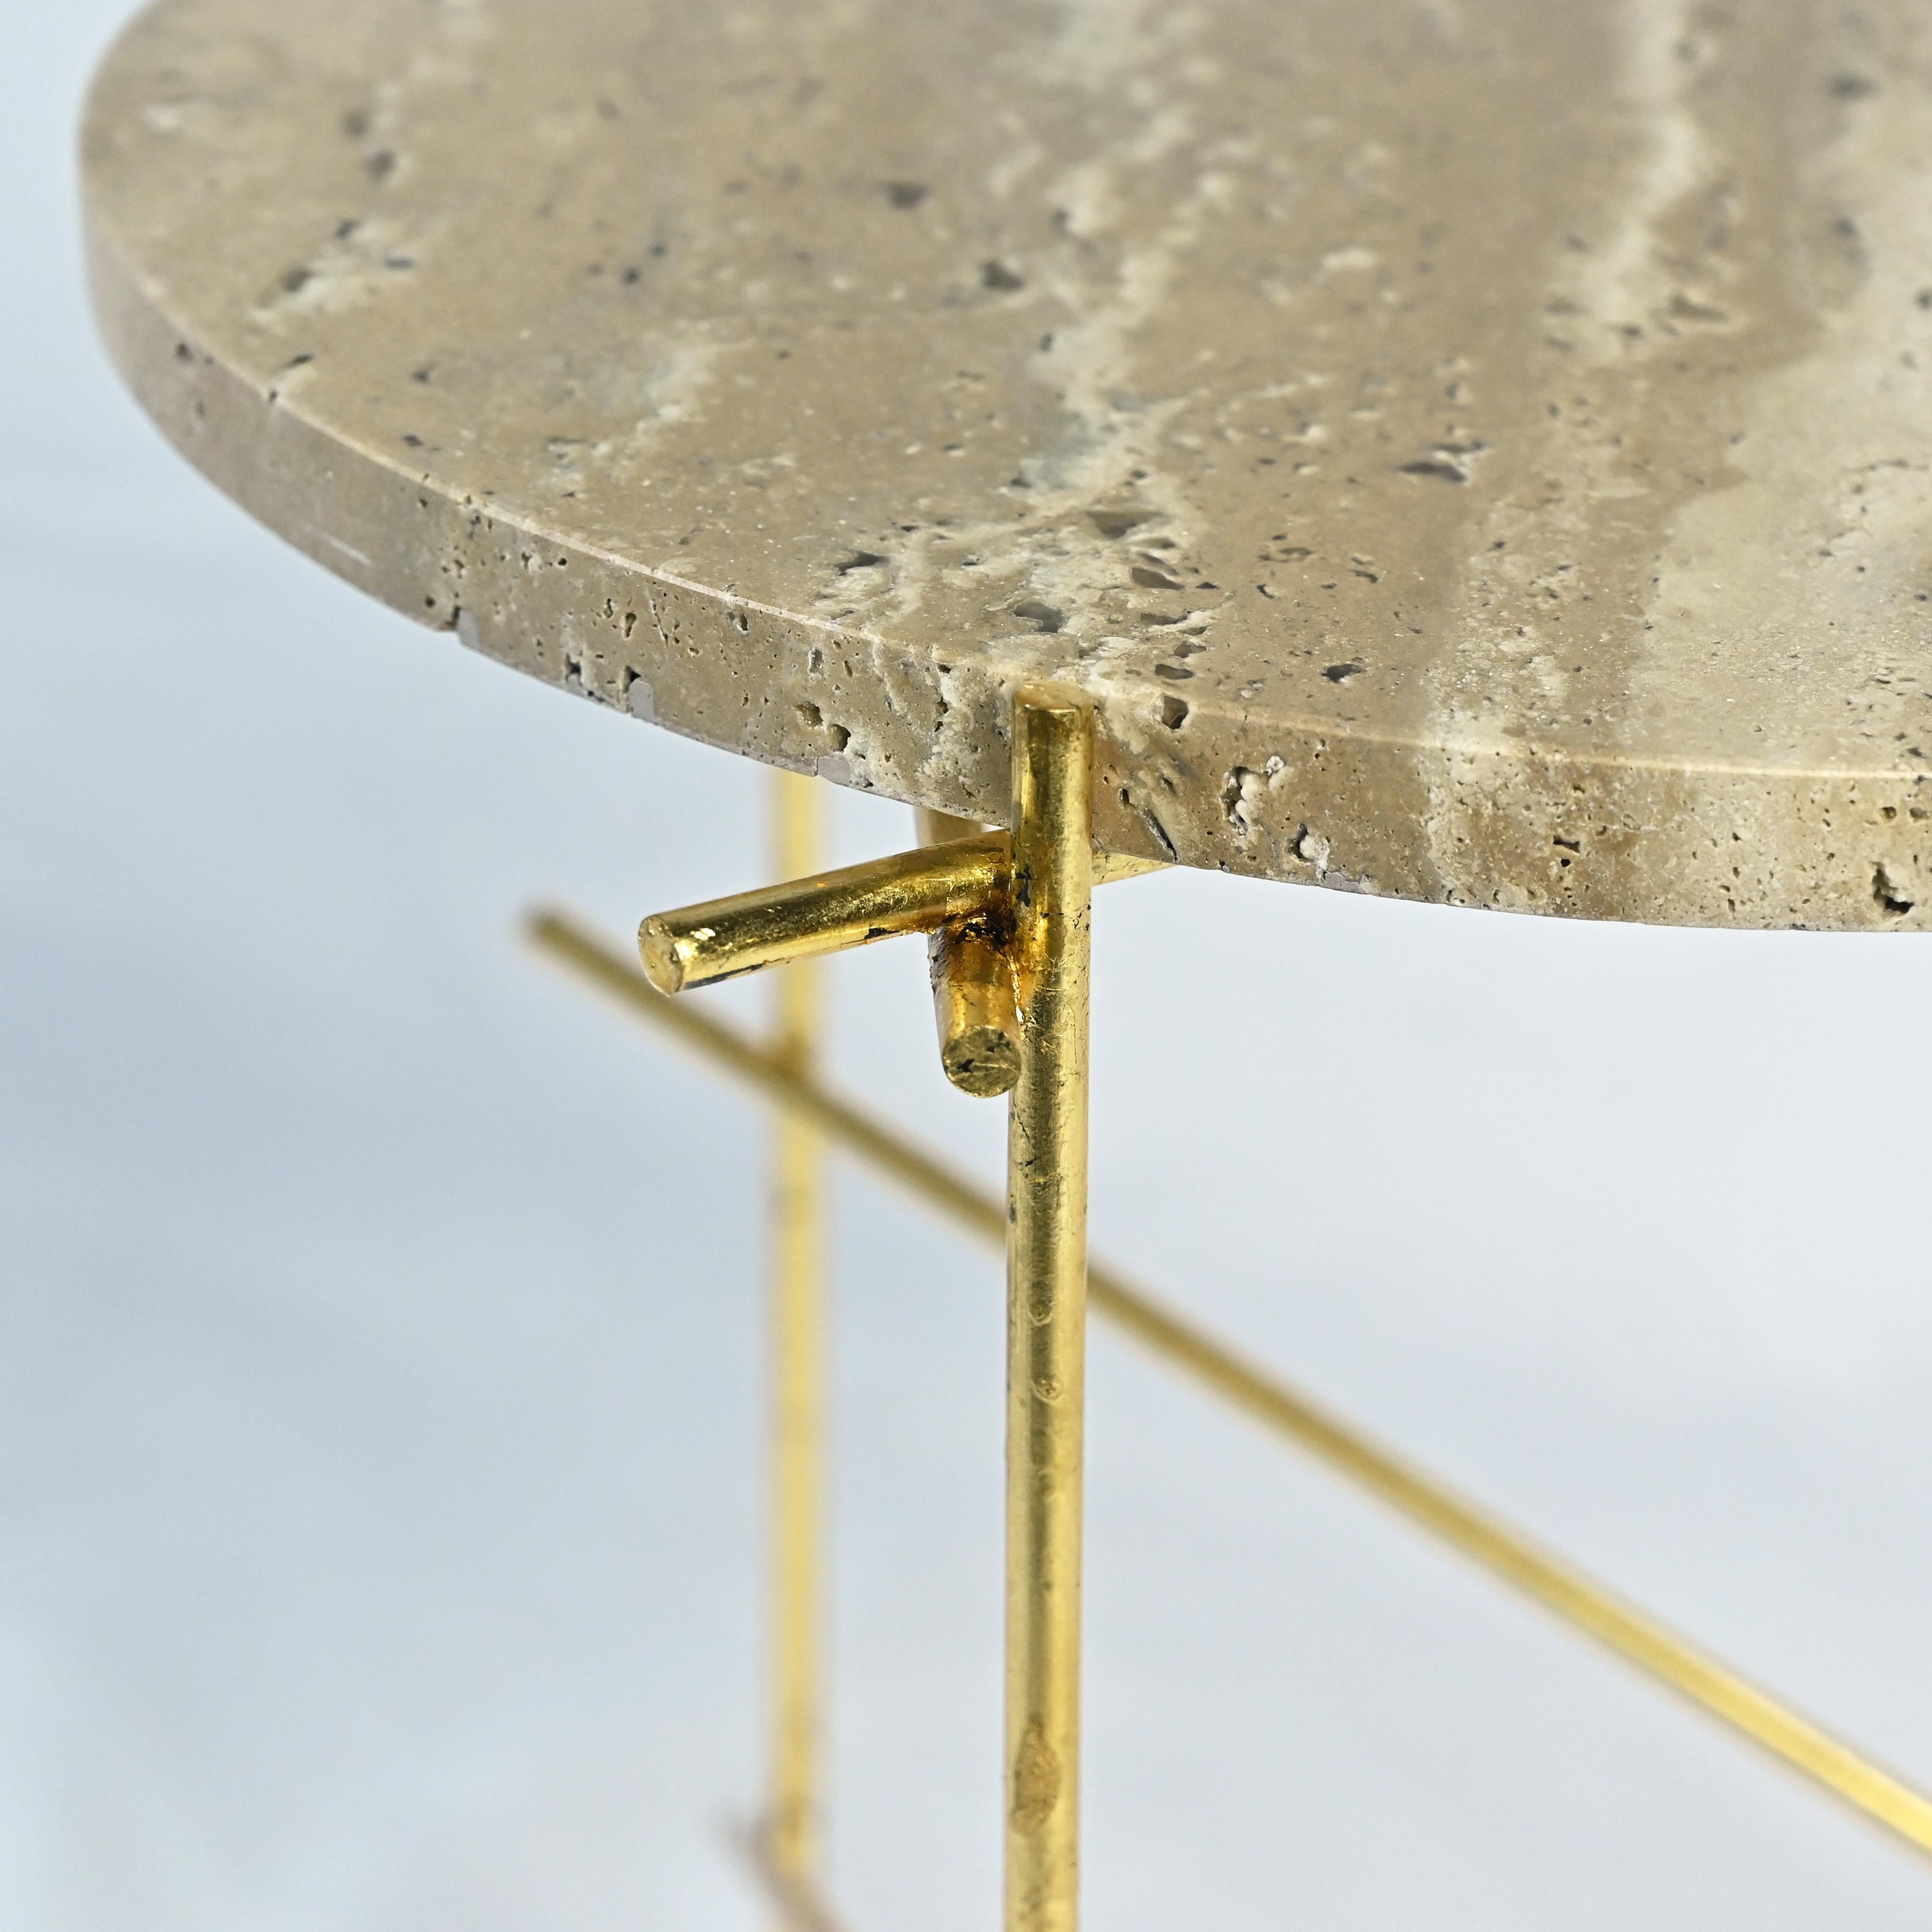 Italian Slilts - Travertine and Gold Leaf Coffee Tables By DFdesignlab Handmade in Italy For Sale